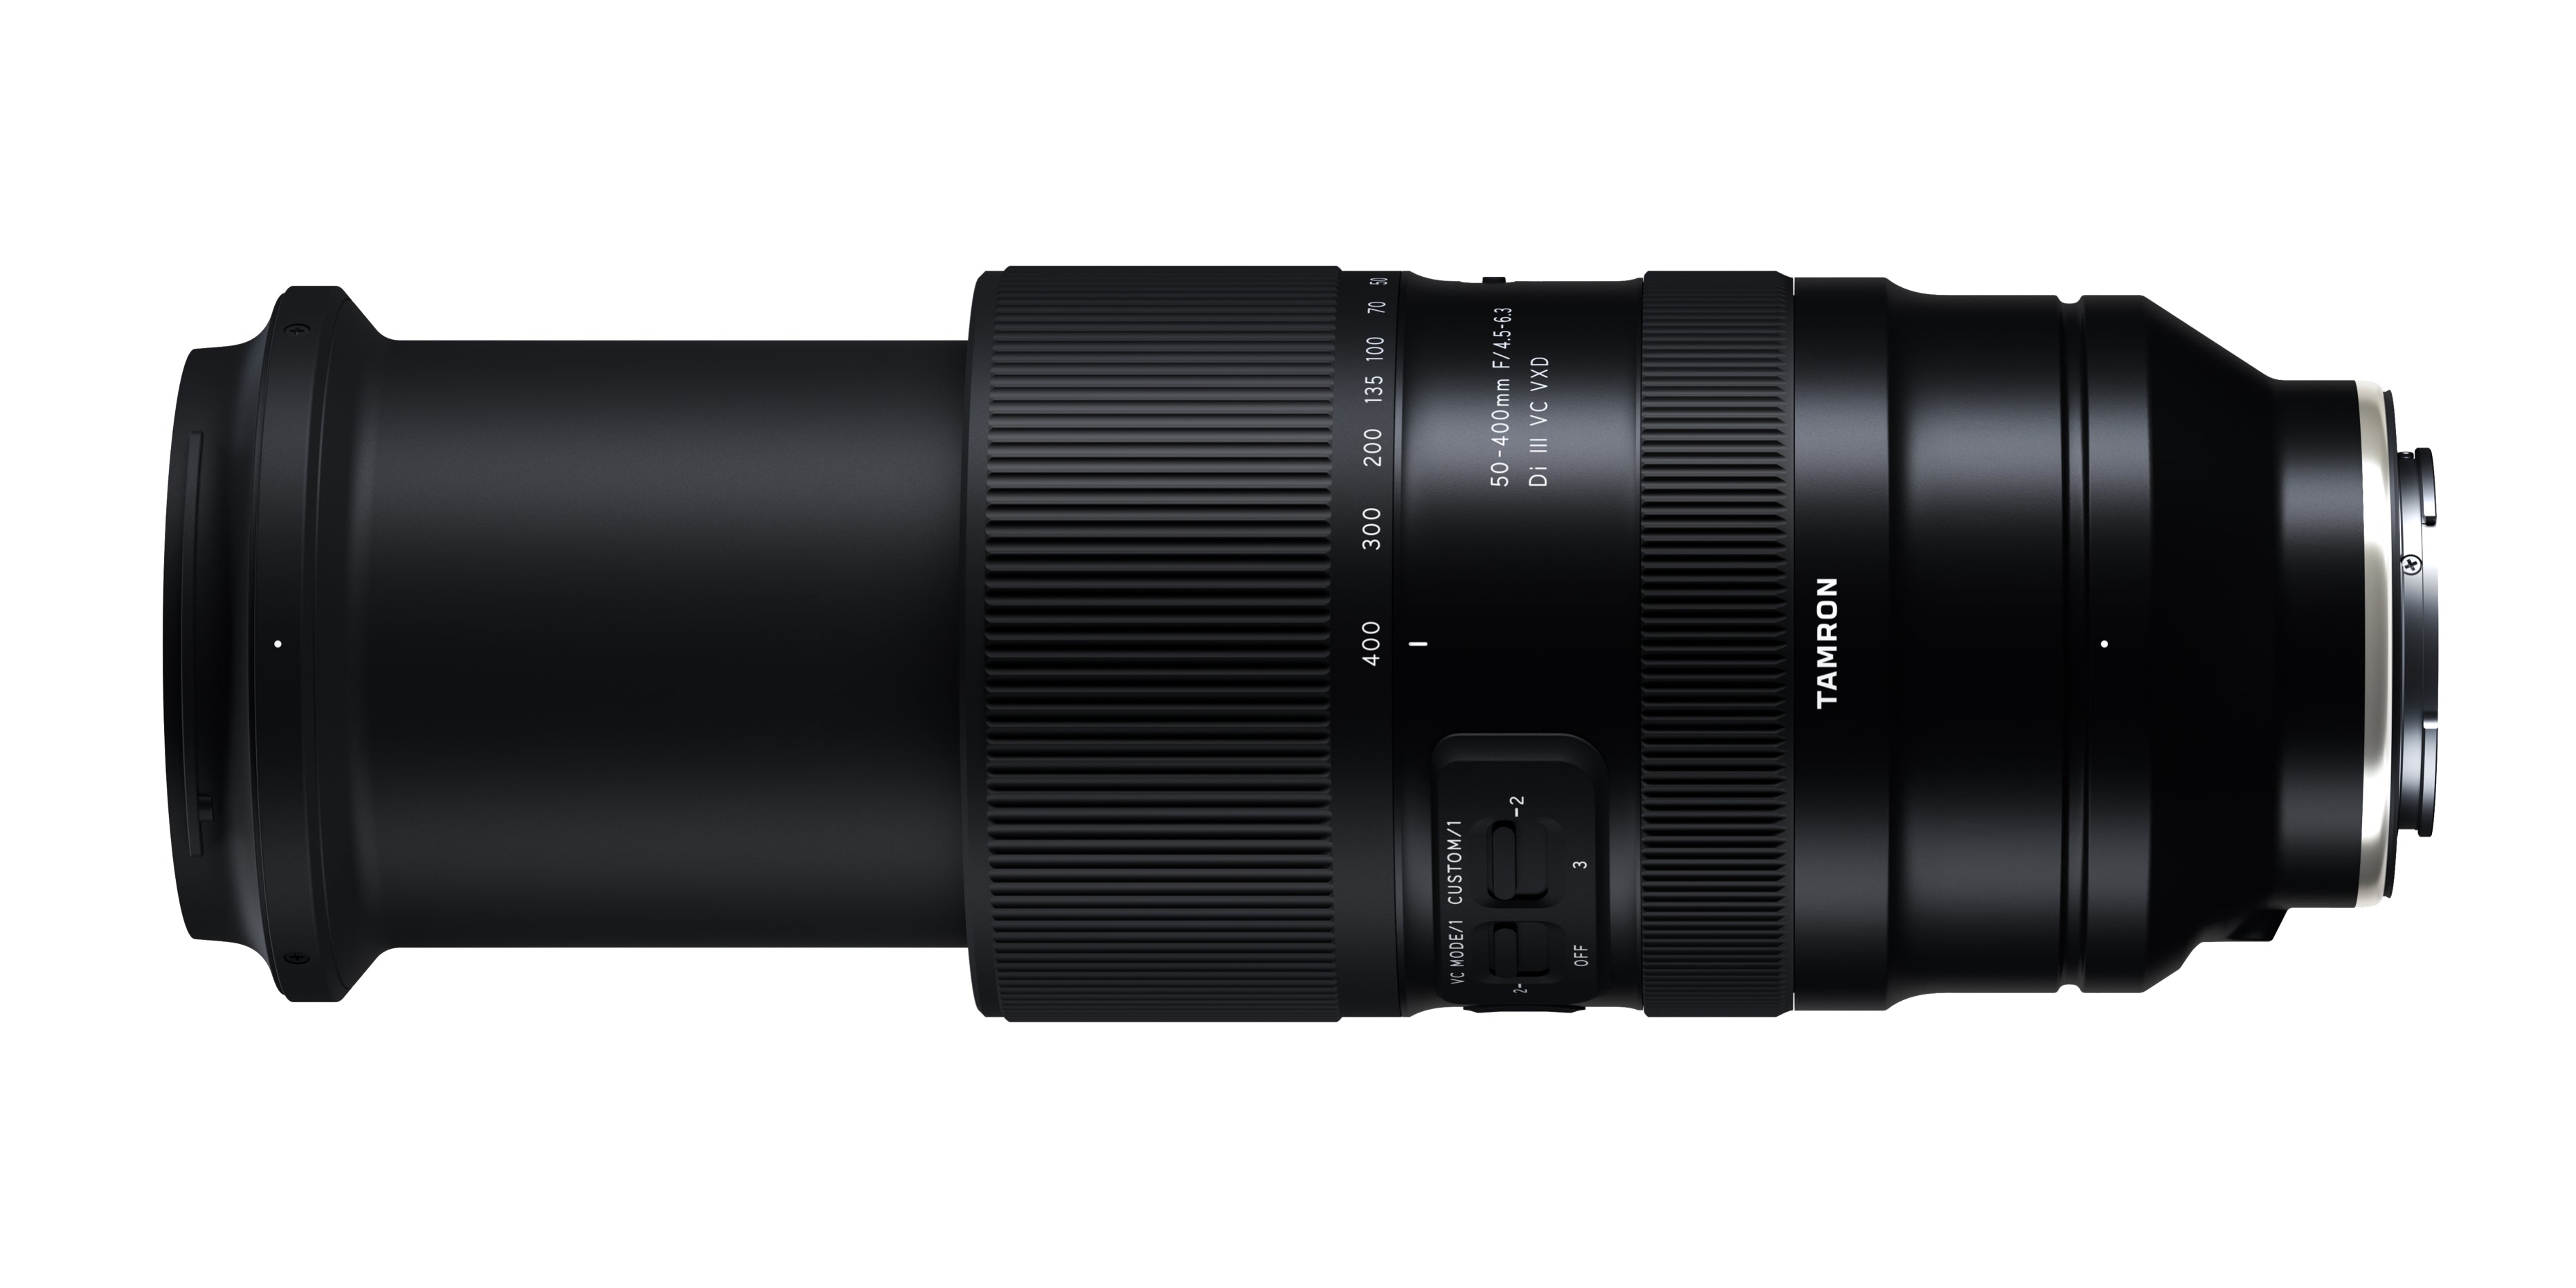 Tamron 50-400mm F4.5-6.3 Di III VXD for Sony FE Lens